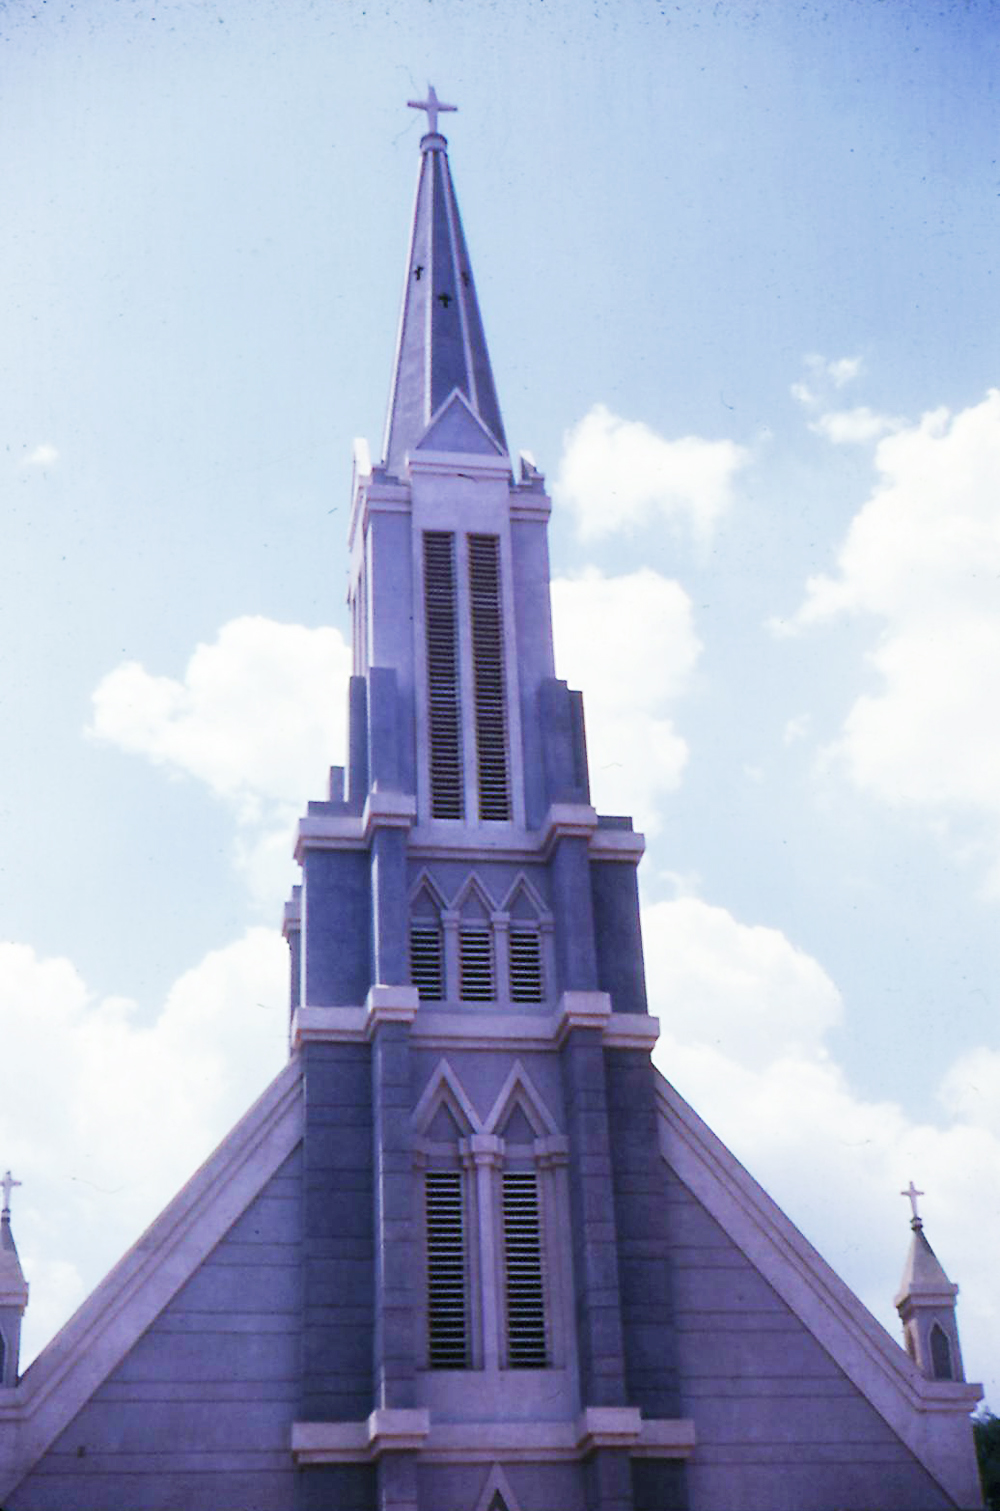 a cathedral like structure has a steeple with a cross at the top